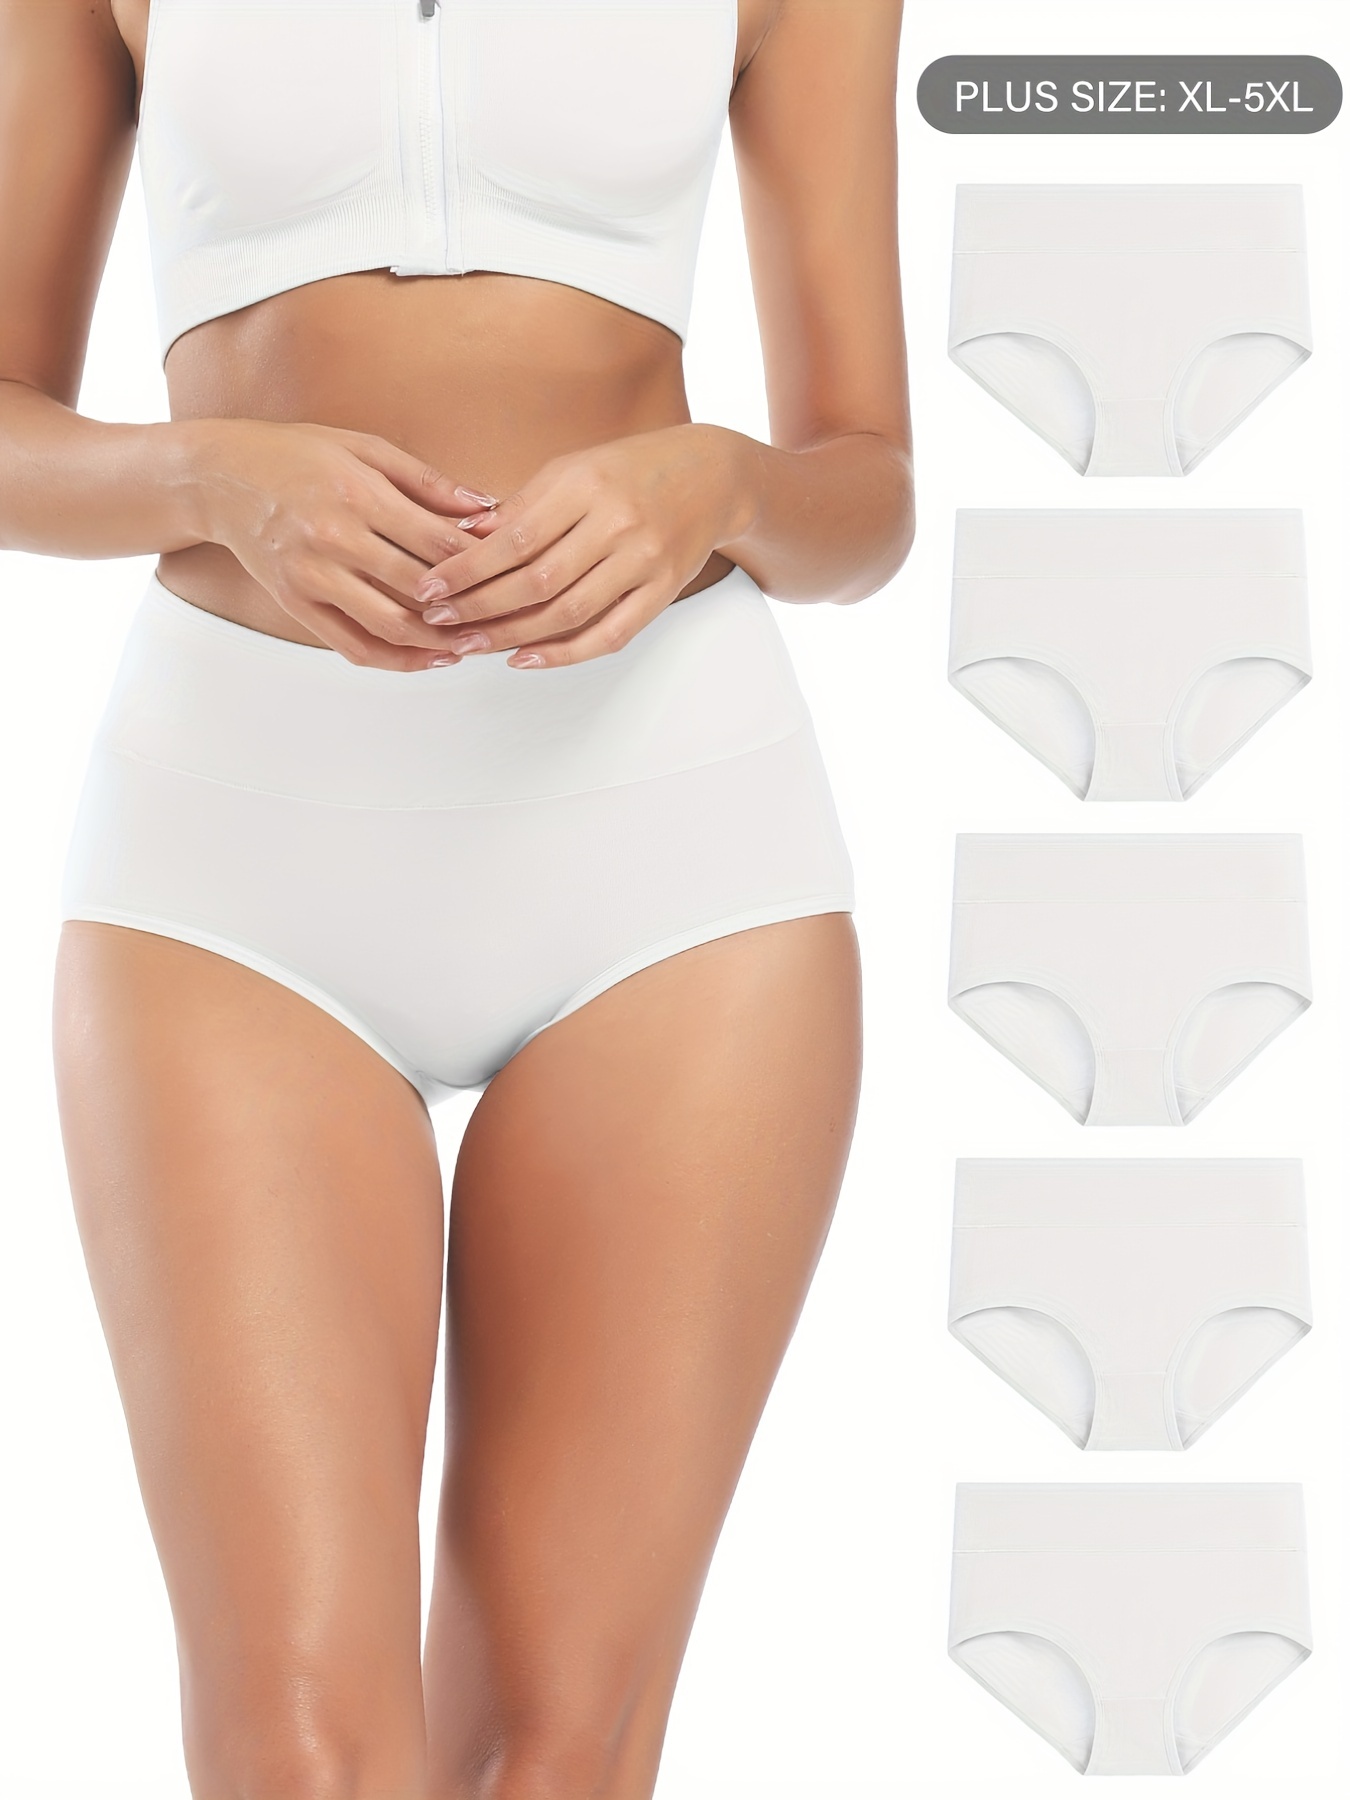 5 PACK Curve White & Bright Plain Cotton High Waisted Full Briefs